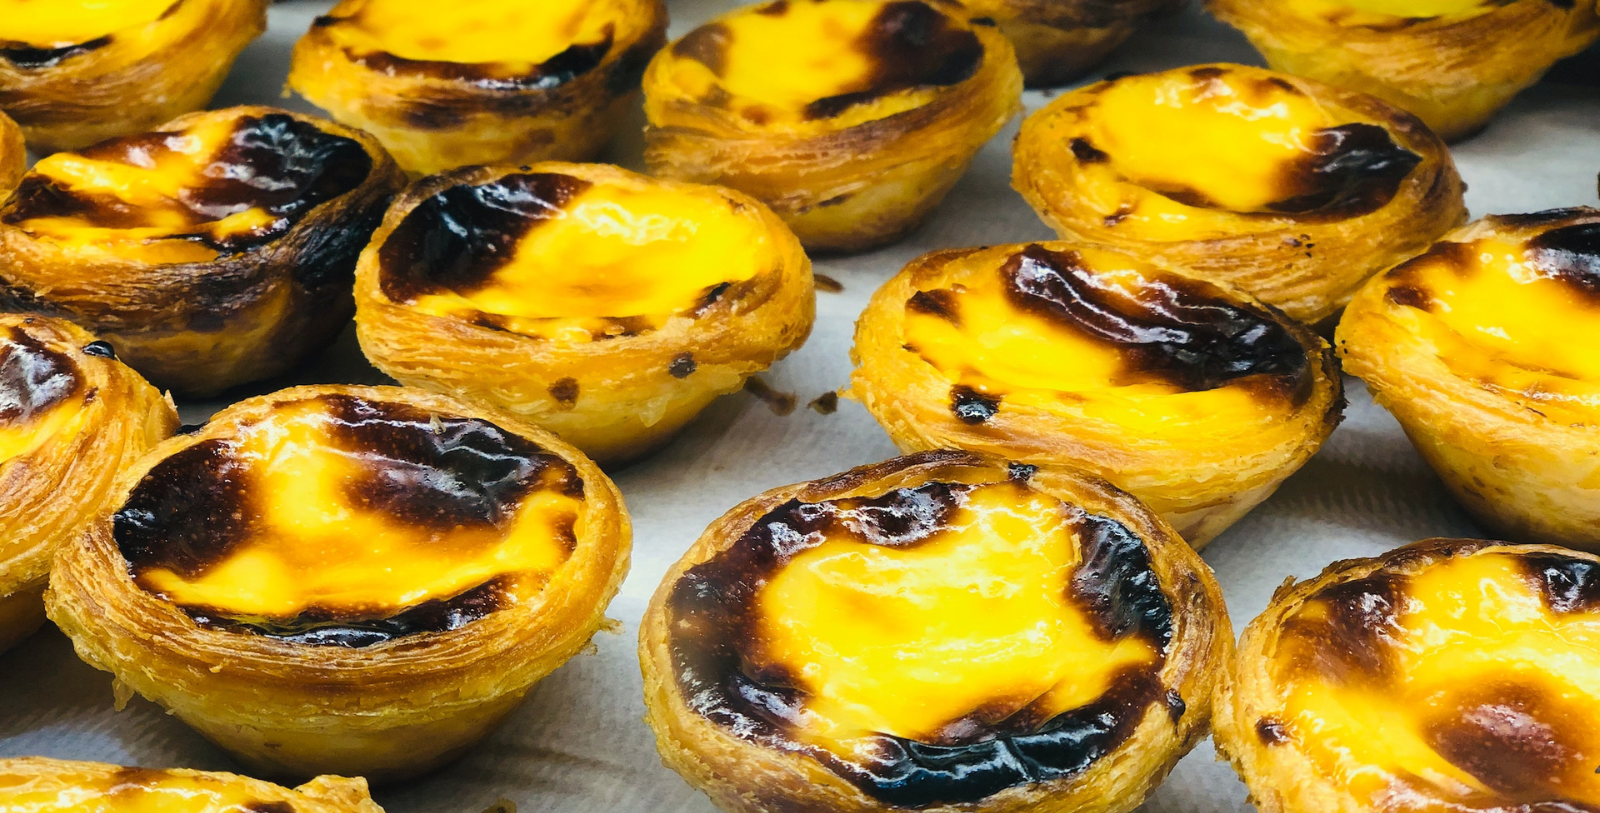 Taste Lisbon’s delicious culinary traditions, from ocean-fresh seafood like tinned conservas and bacalhau, a meal of salted cod considered the city’s unofficial dish, to pastéis de nata, a sweet, custard-filled egg tart.